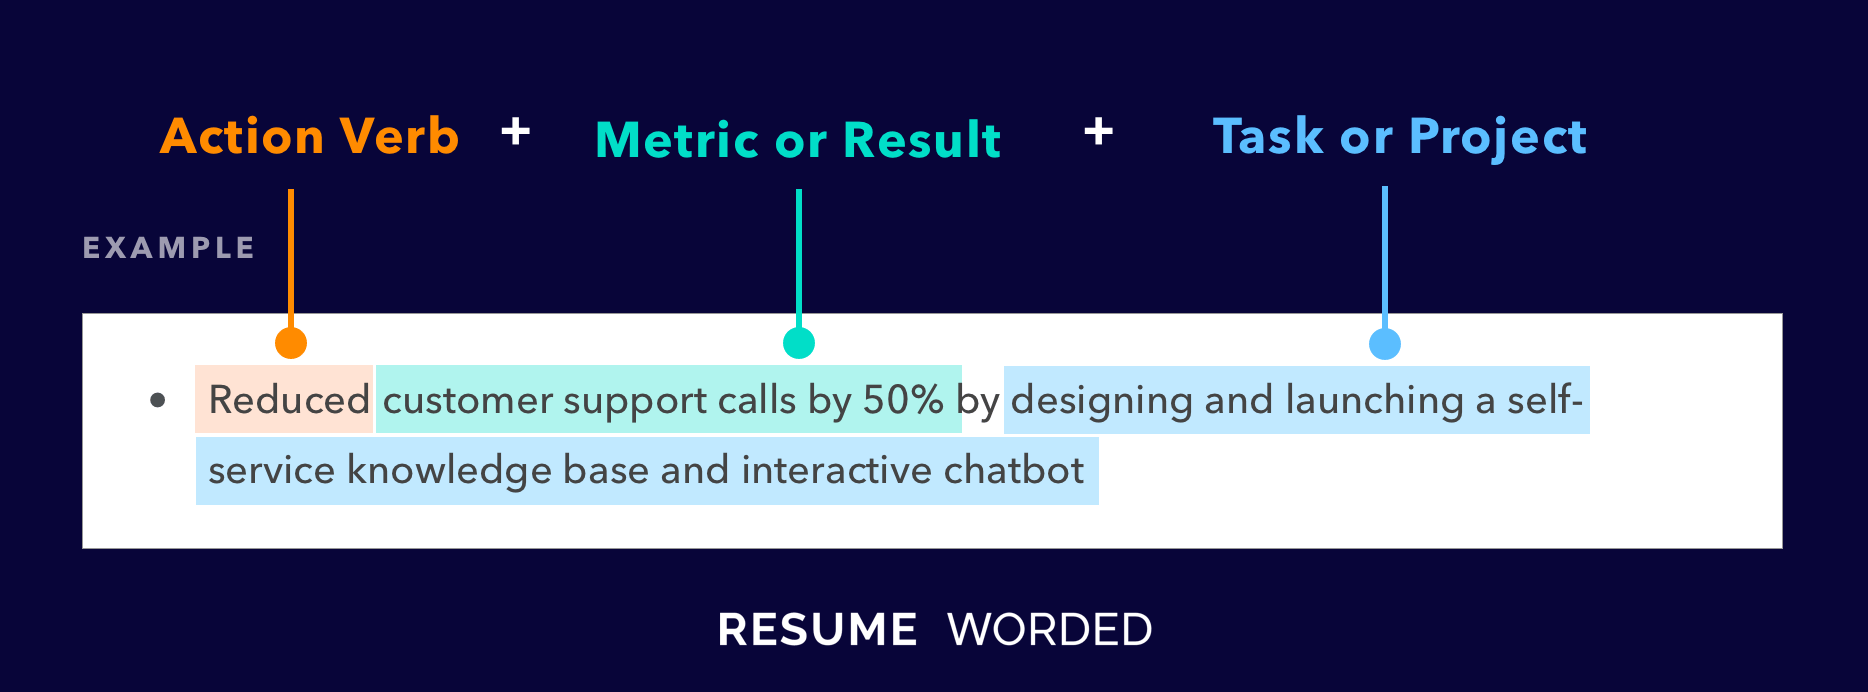 Include sales metrics, and show how you impacted the company's bottom line - Inside Sales Account Manager Resume